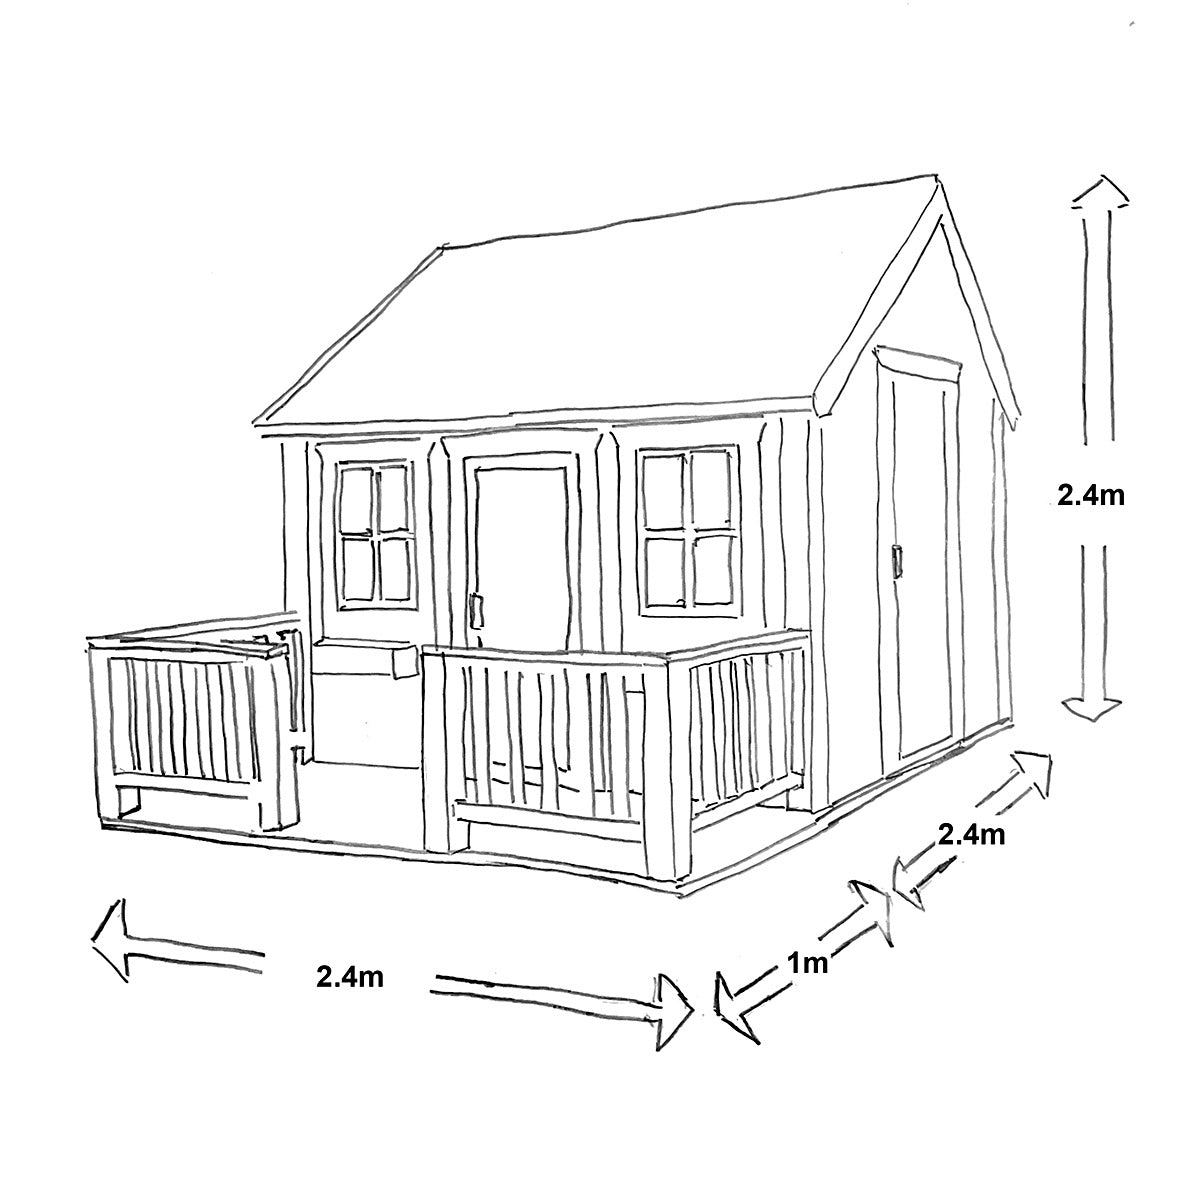 Black and White drawing of a playhouse with main dimensions by KidsPlayHouses_EU